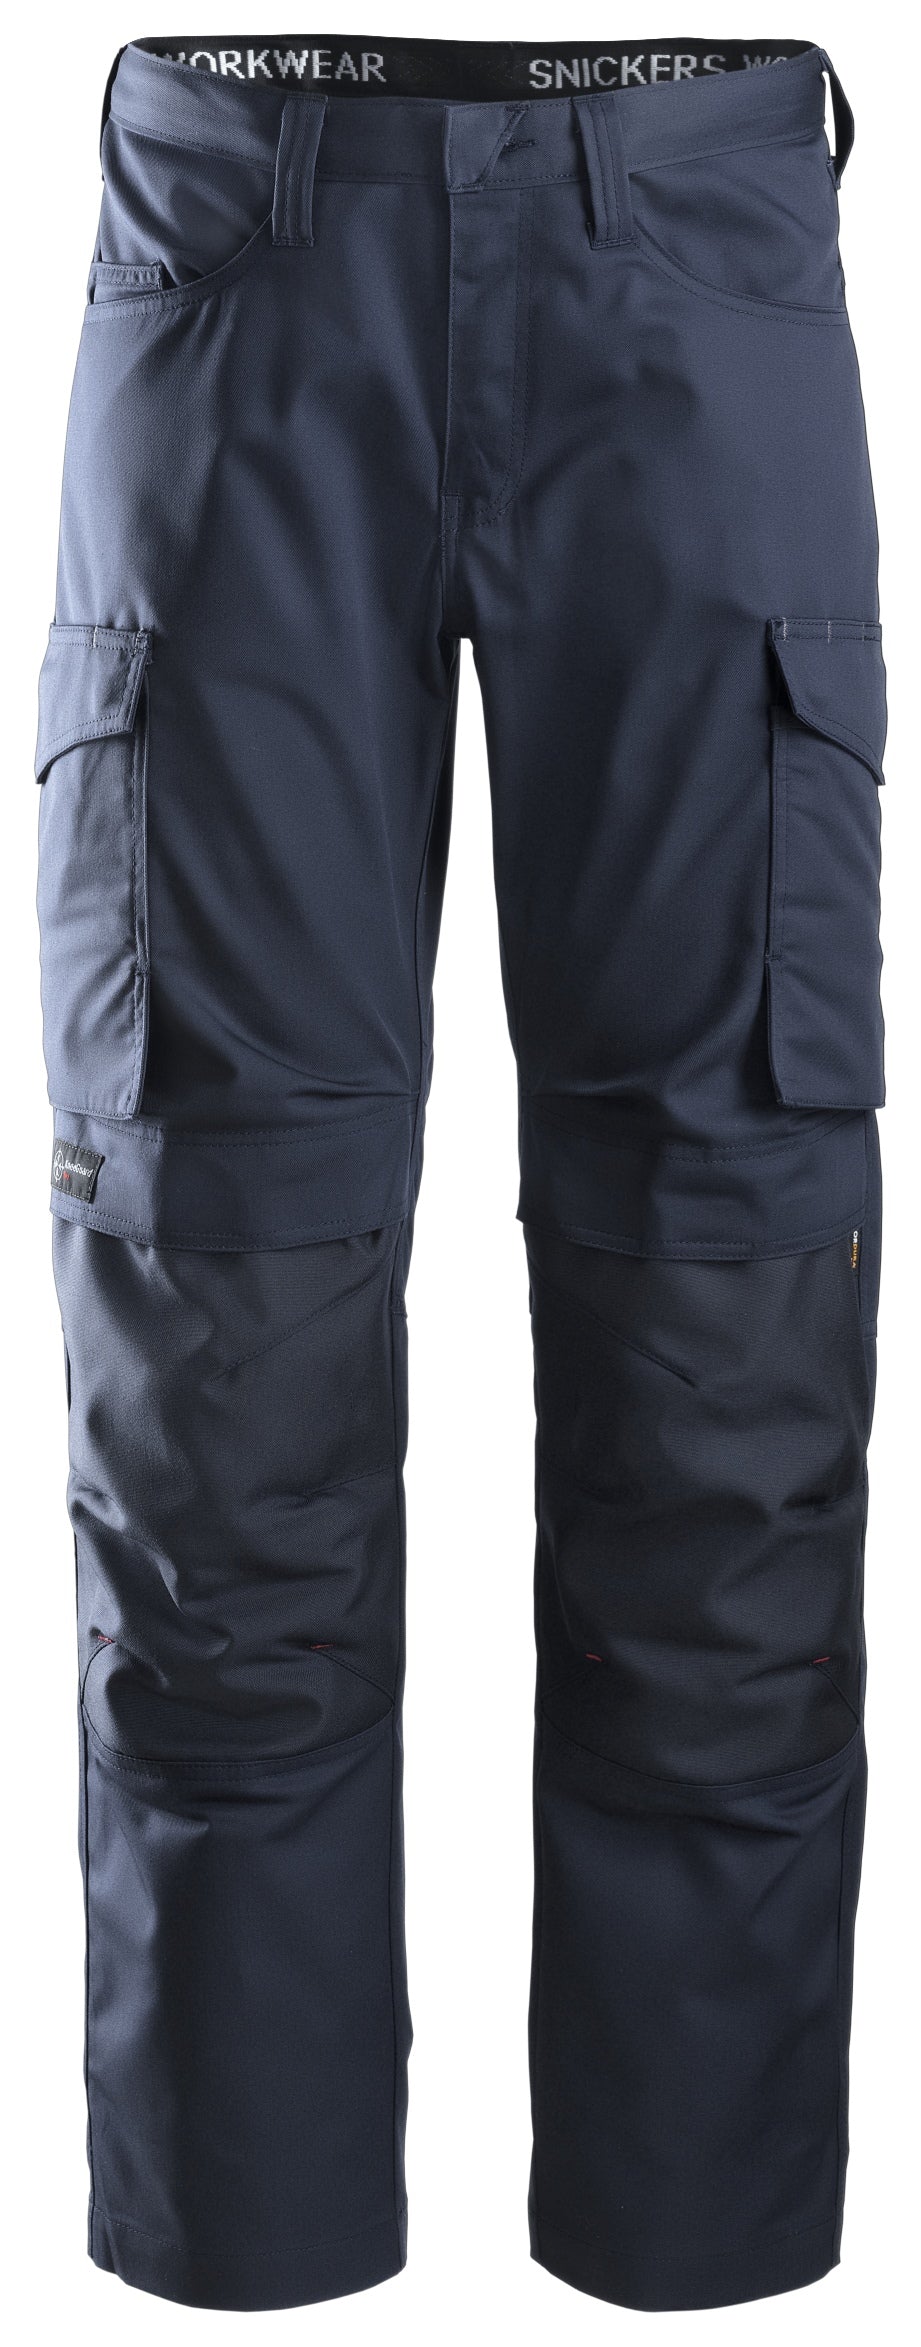 Snickers 6801 Sl Trousers Knee Guard Navy\Navy